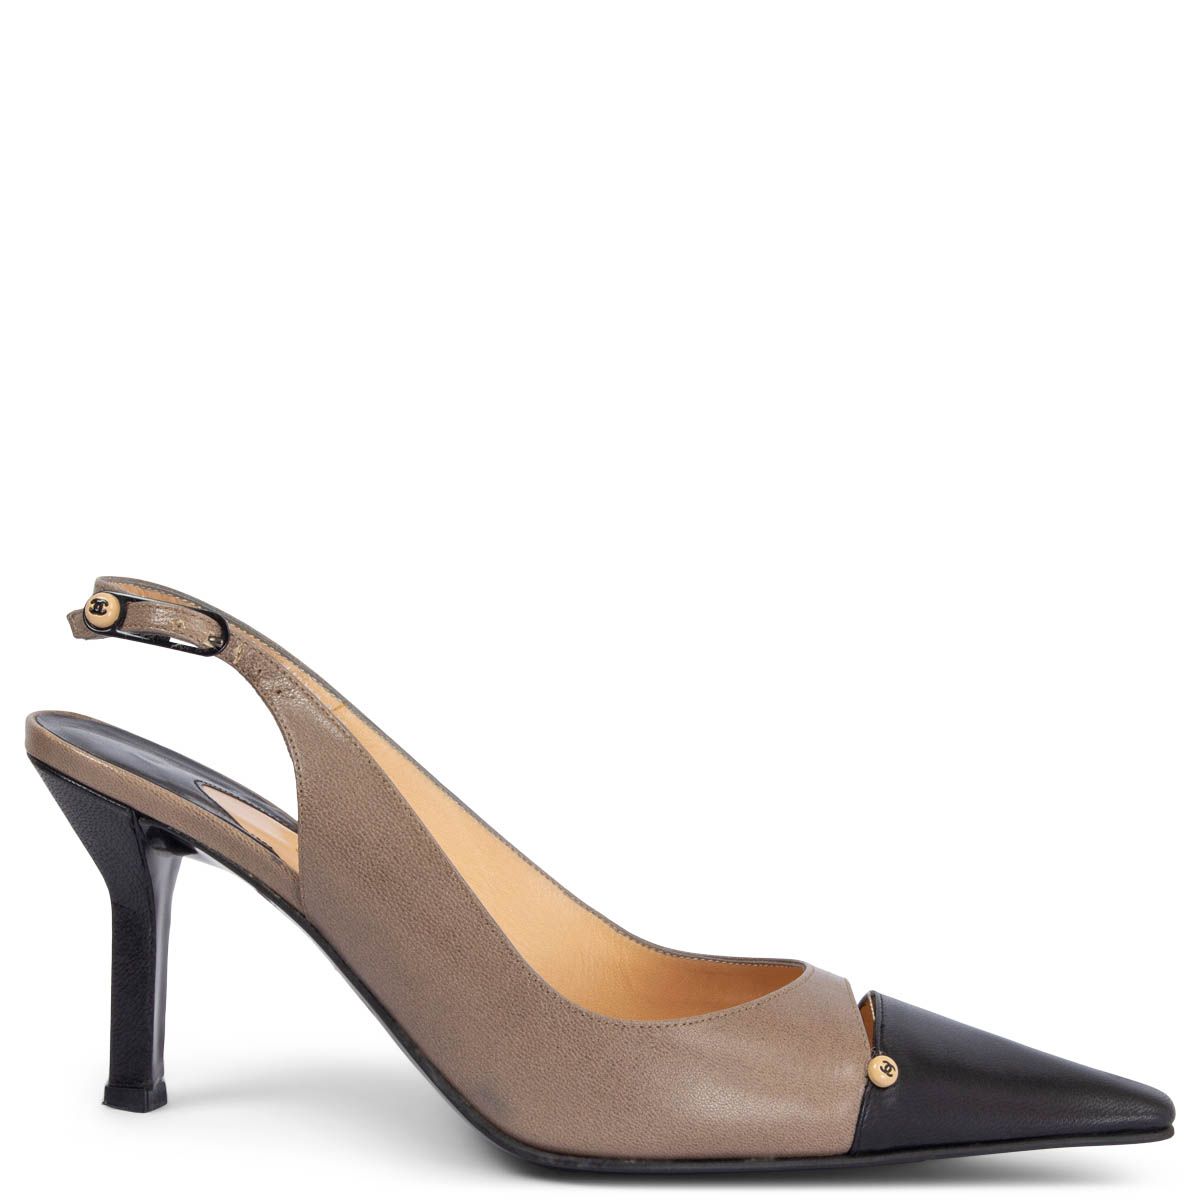 Chanel Pointed Toe Slingbacks Pumps Taupe Black 36